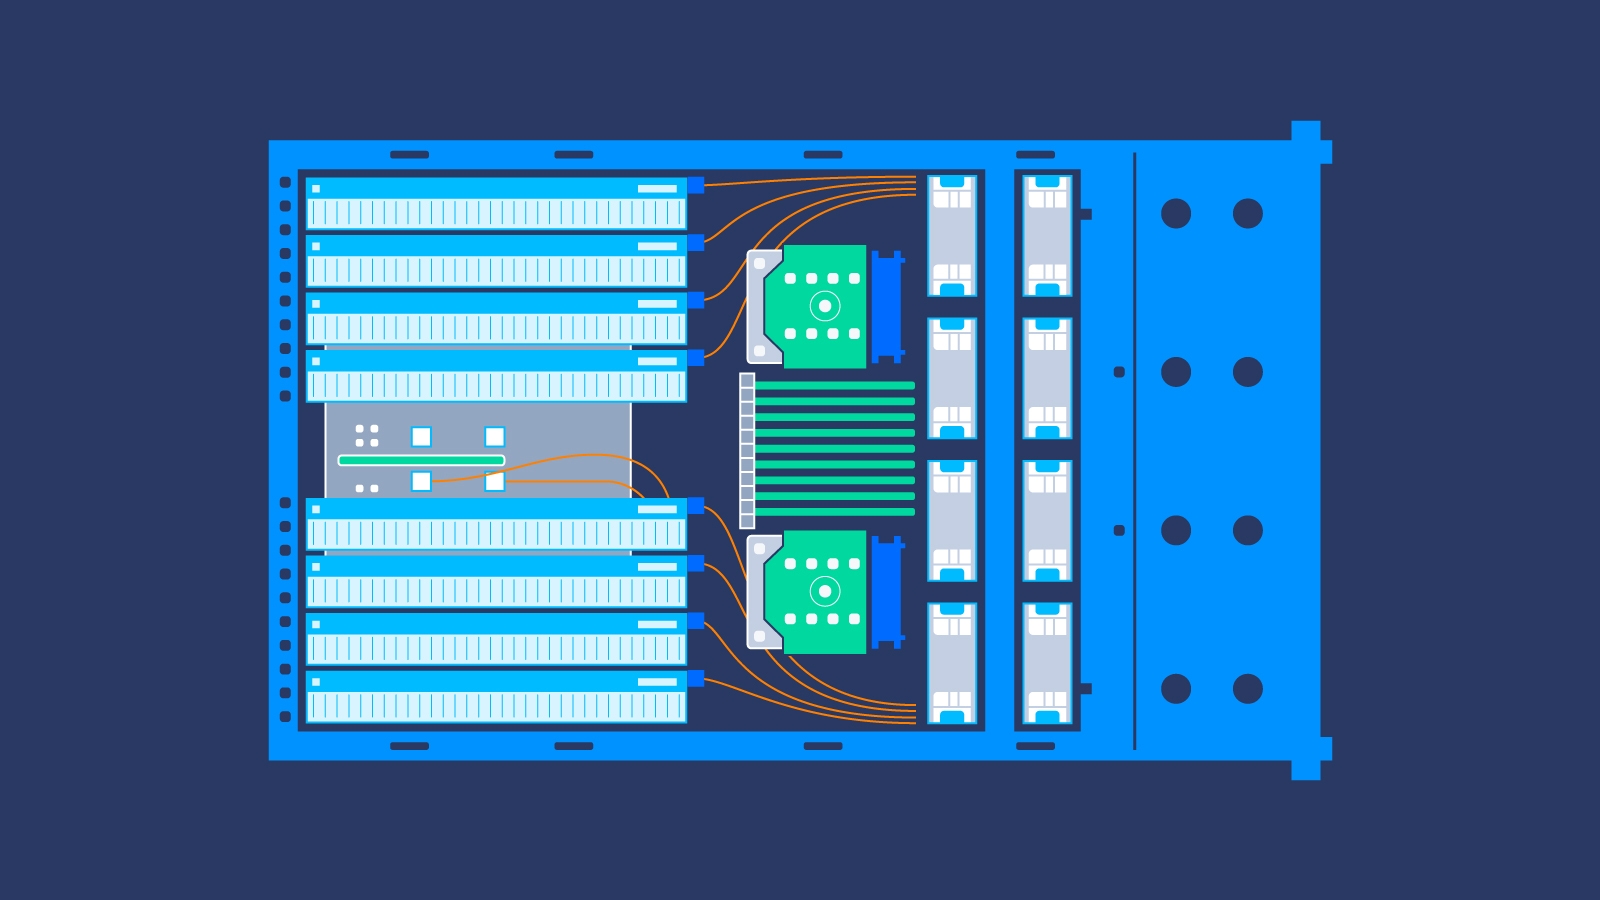 In the end, each GPU reduces time spent in the training phase, increases model efficiency, and yields more high-end results when you choose the correct data parallelization for your model.